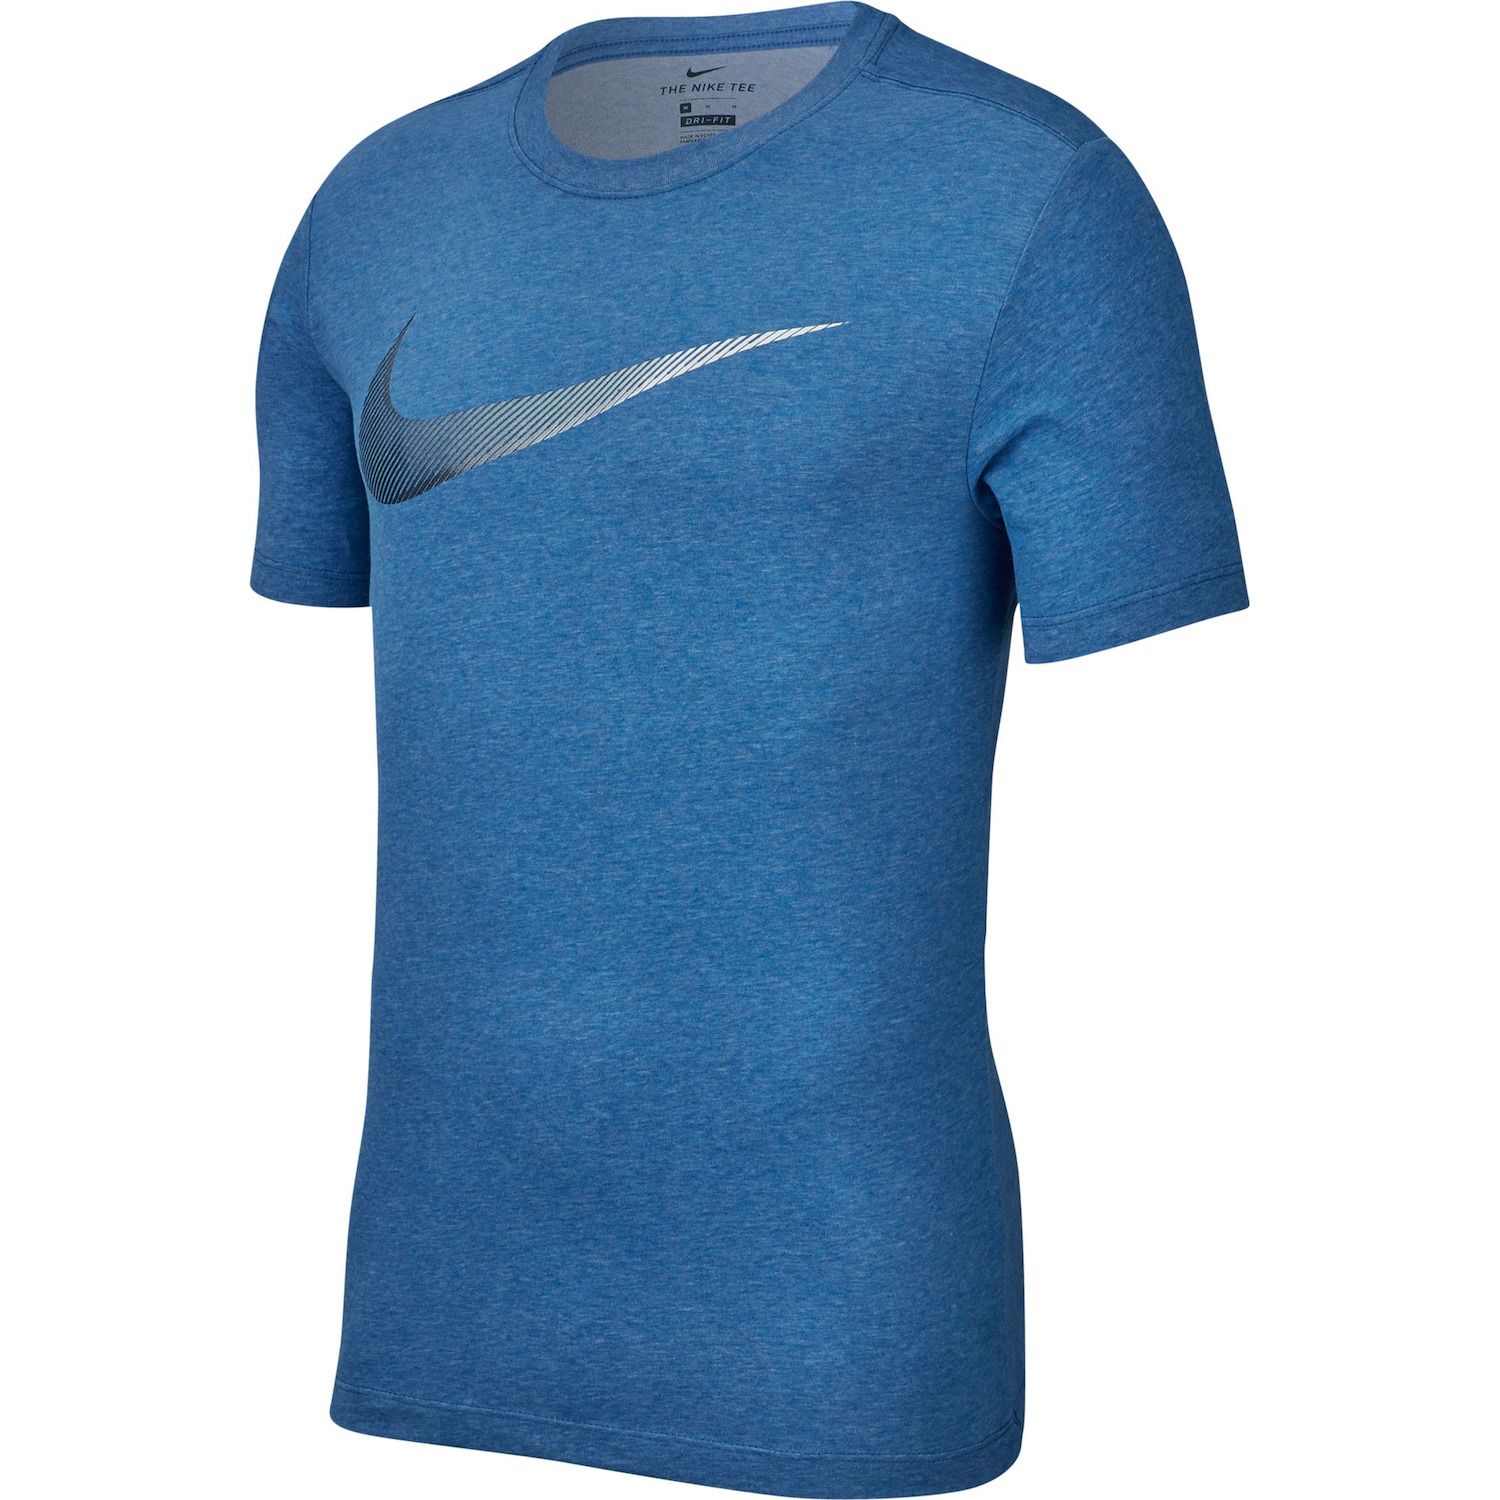 blue and gold nike shirt